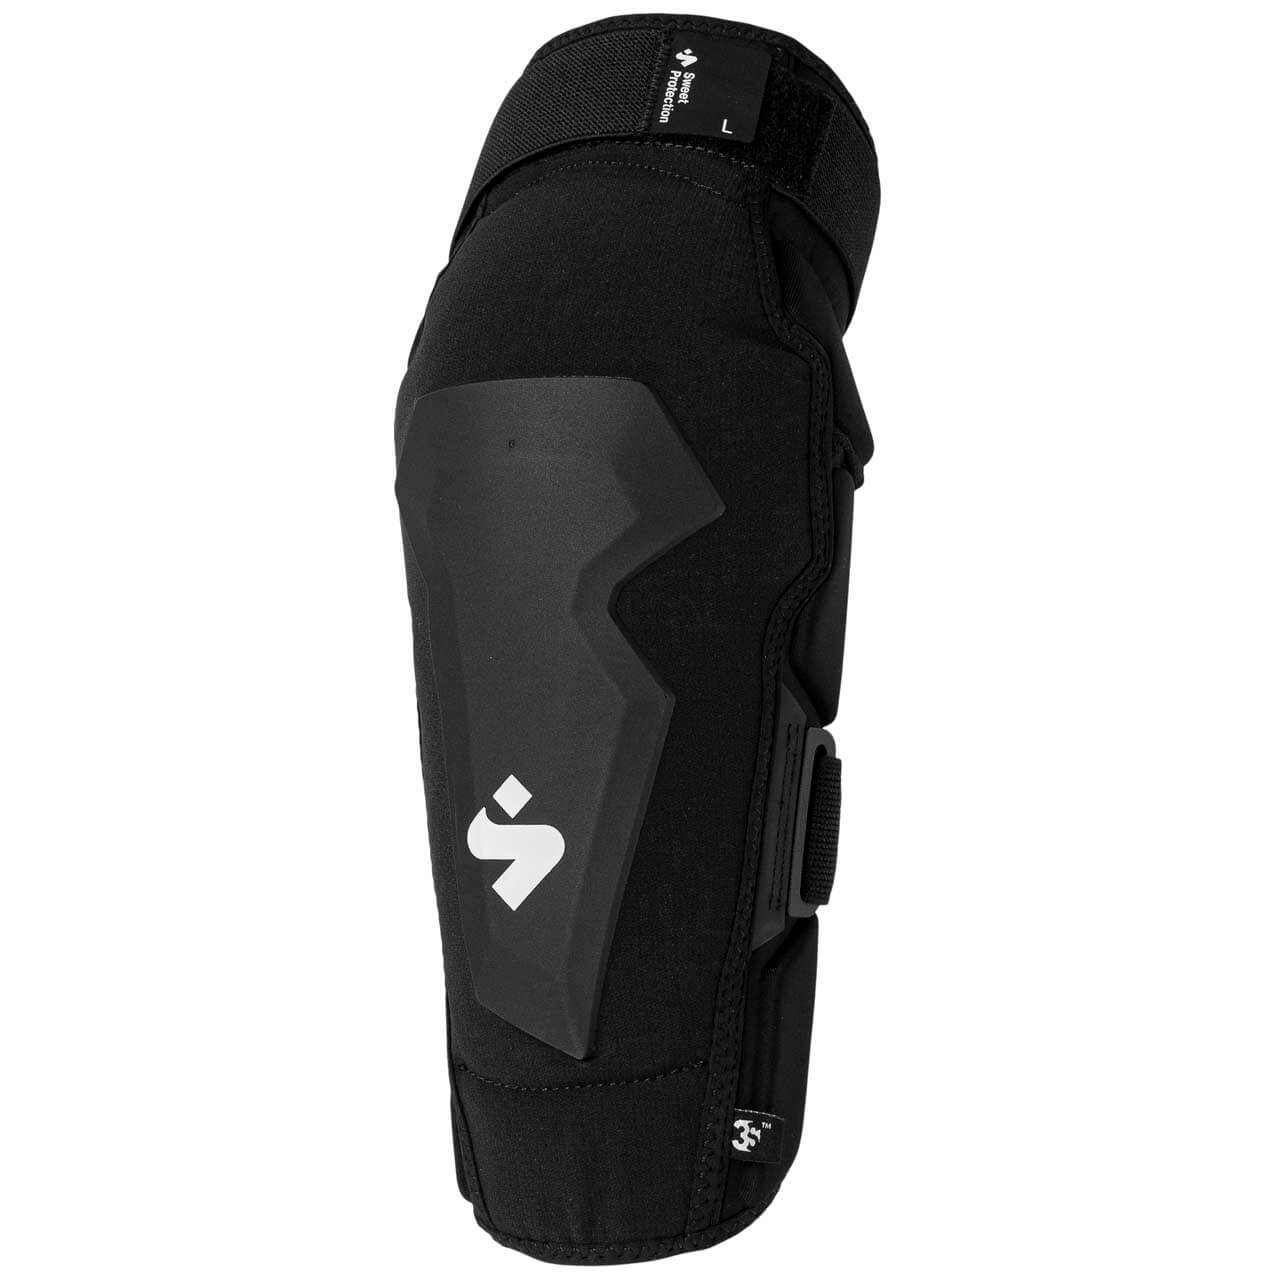 Sweet Protection Knee Guards Pro - Black, M von Sweet Protection}